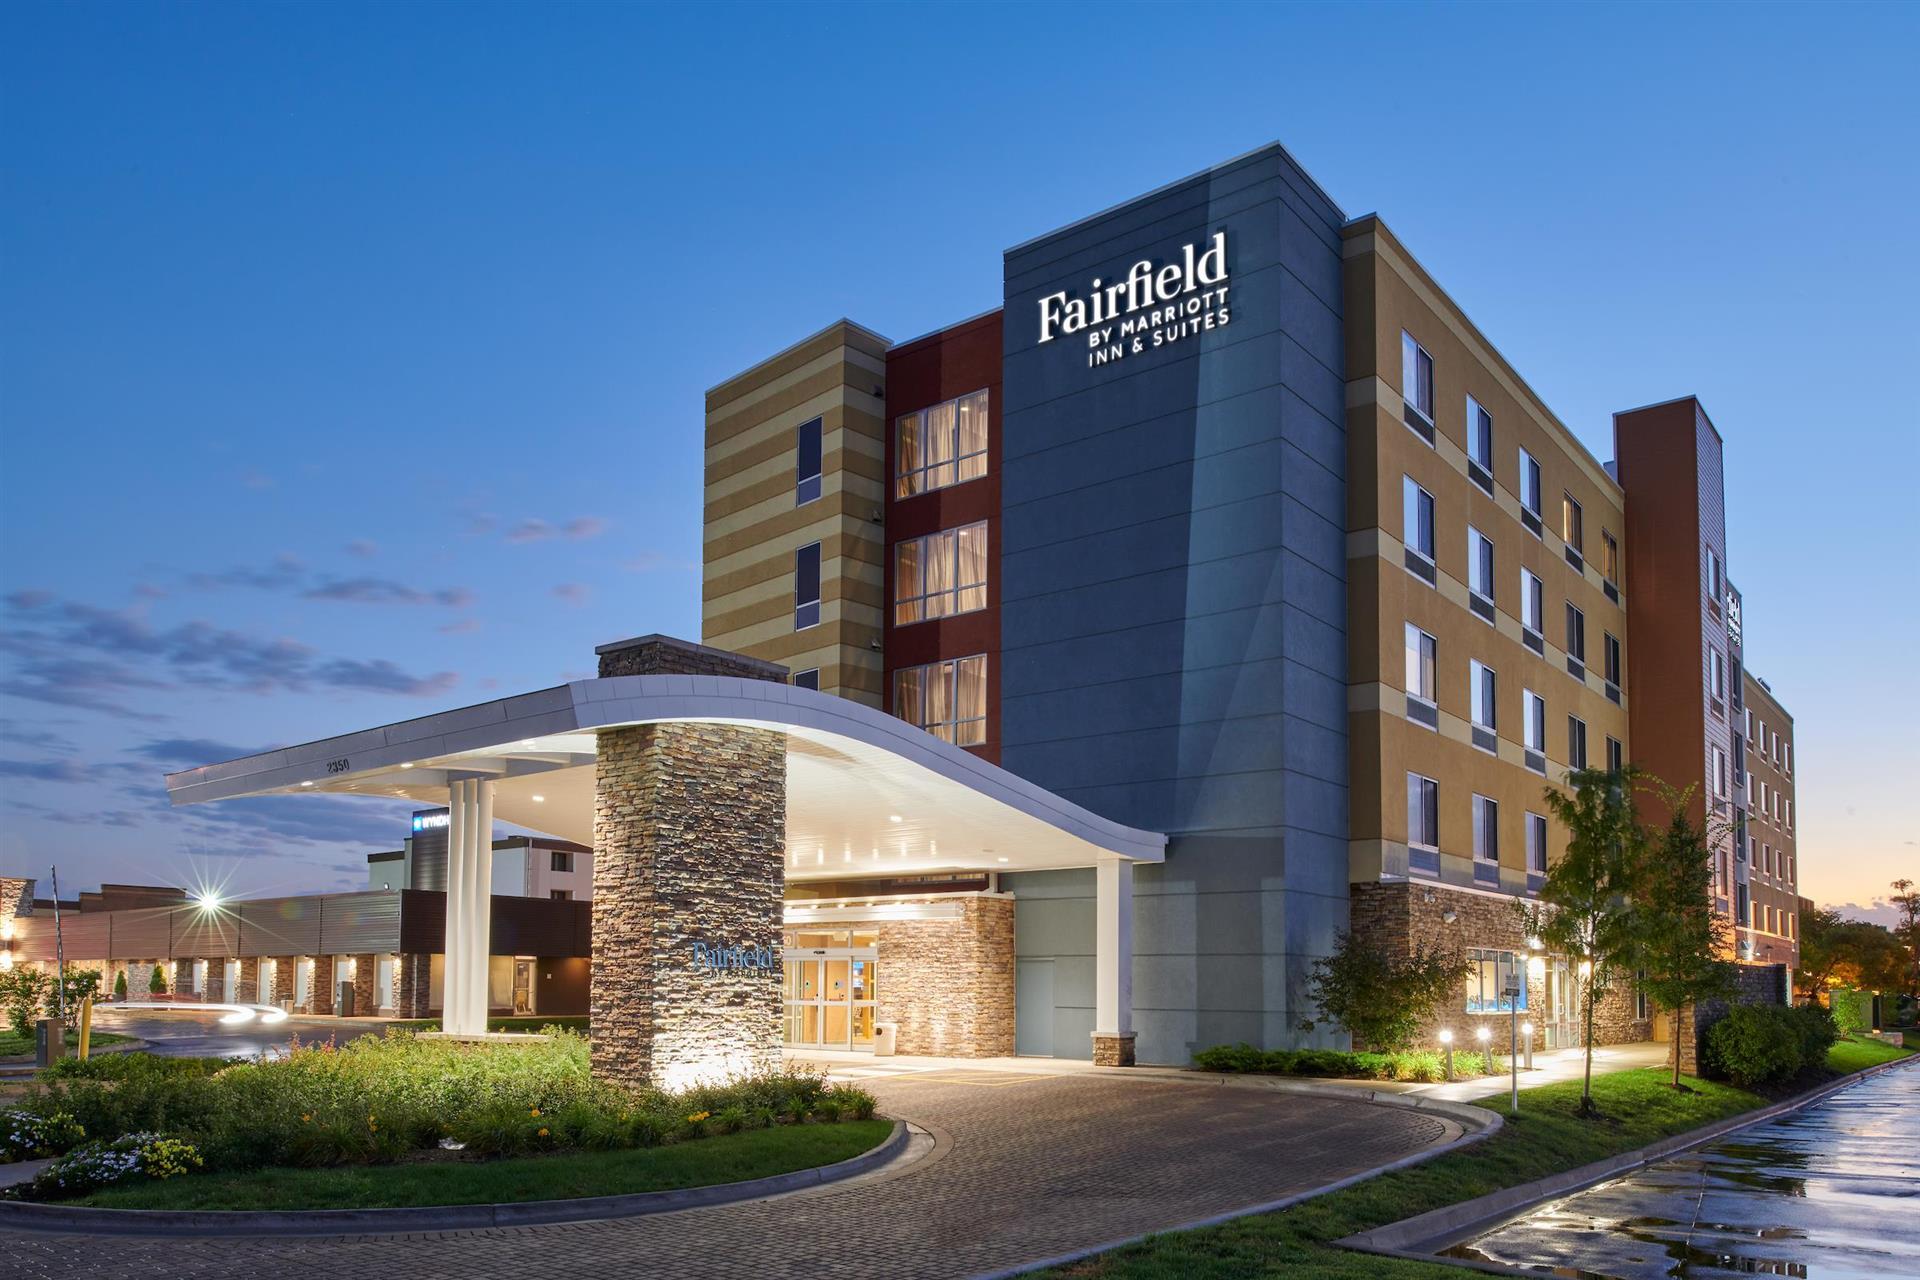 Fairfield Inn & Suites Chicago O'Hare in Des Plaines, IL